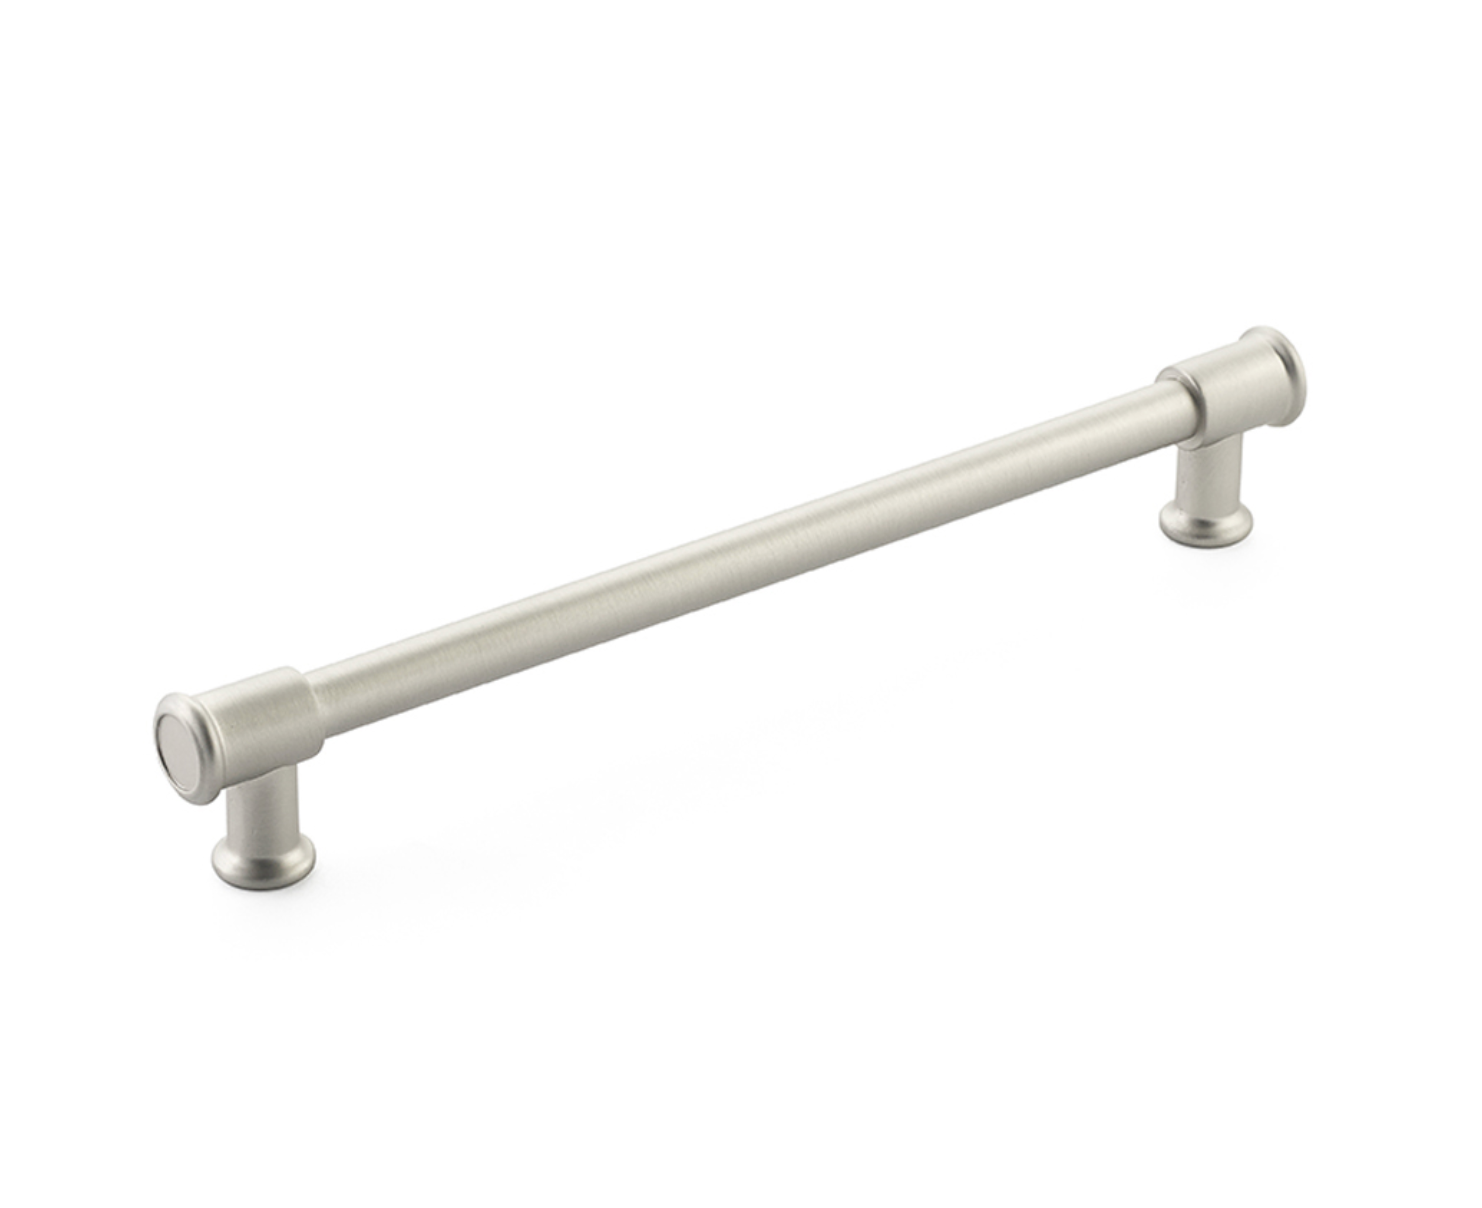 Satin Nickel "Pipe" Cabinet Knob and Drawer Pulls - Industry Hardware